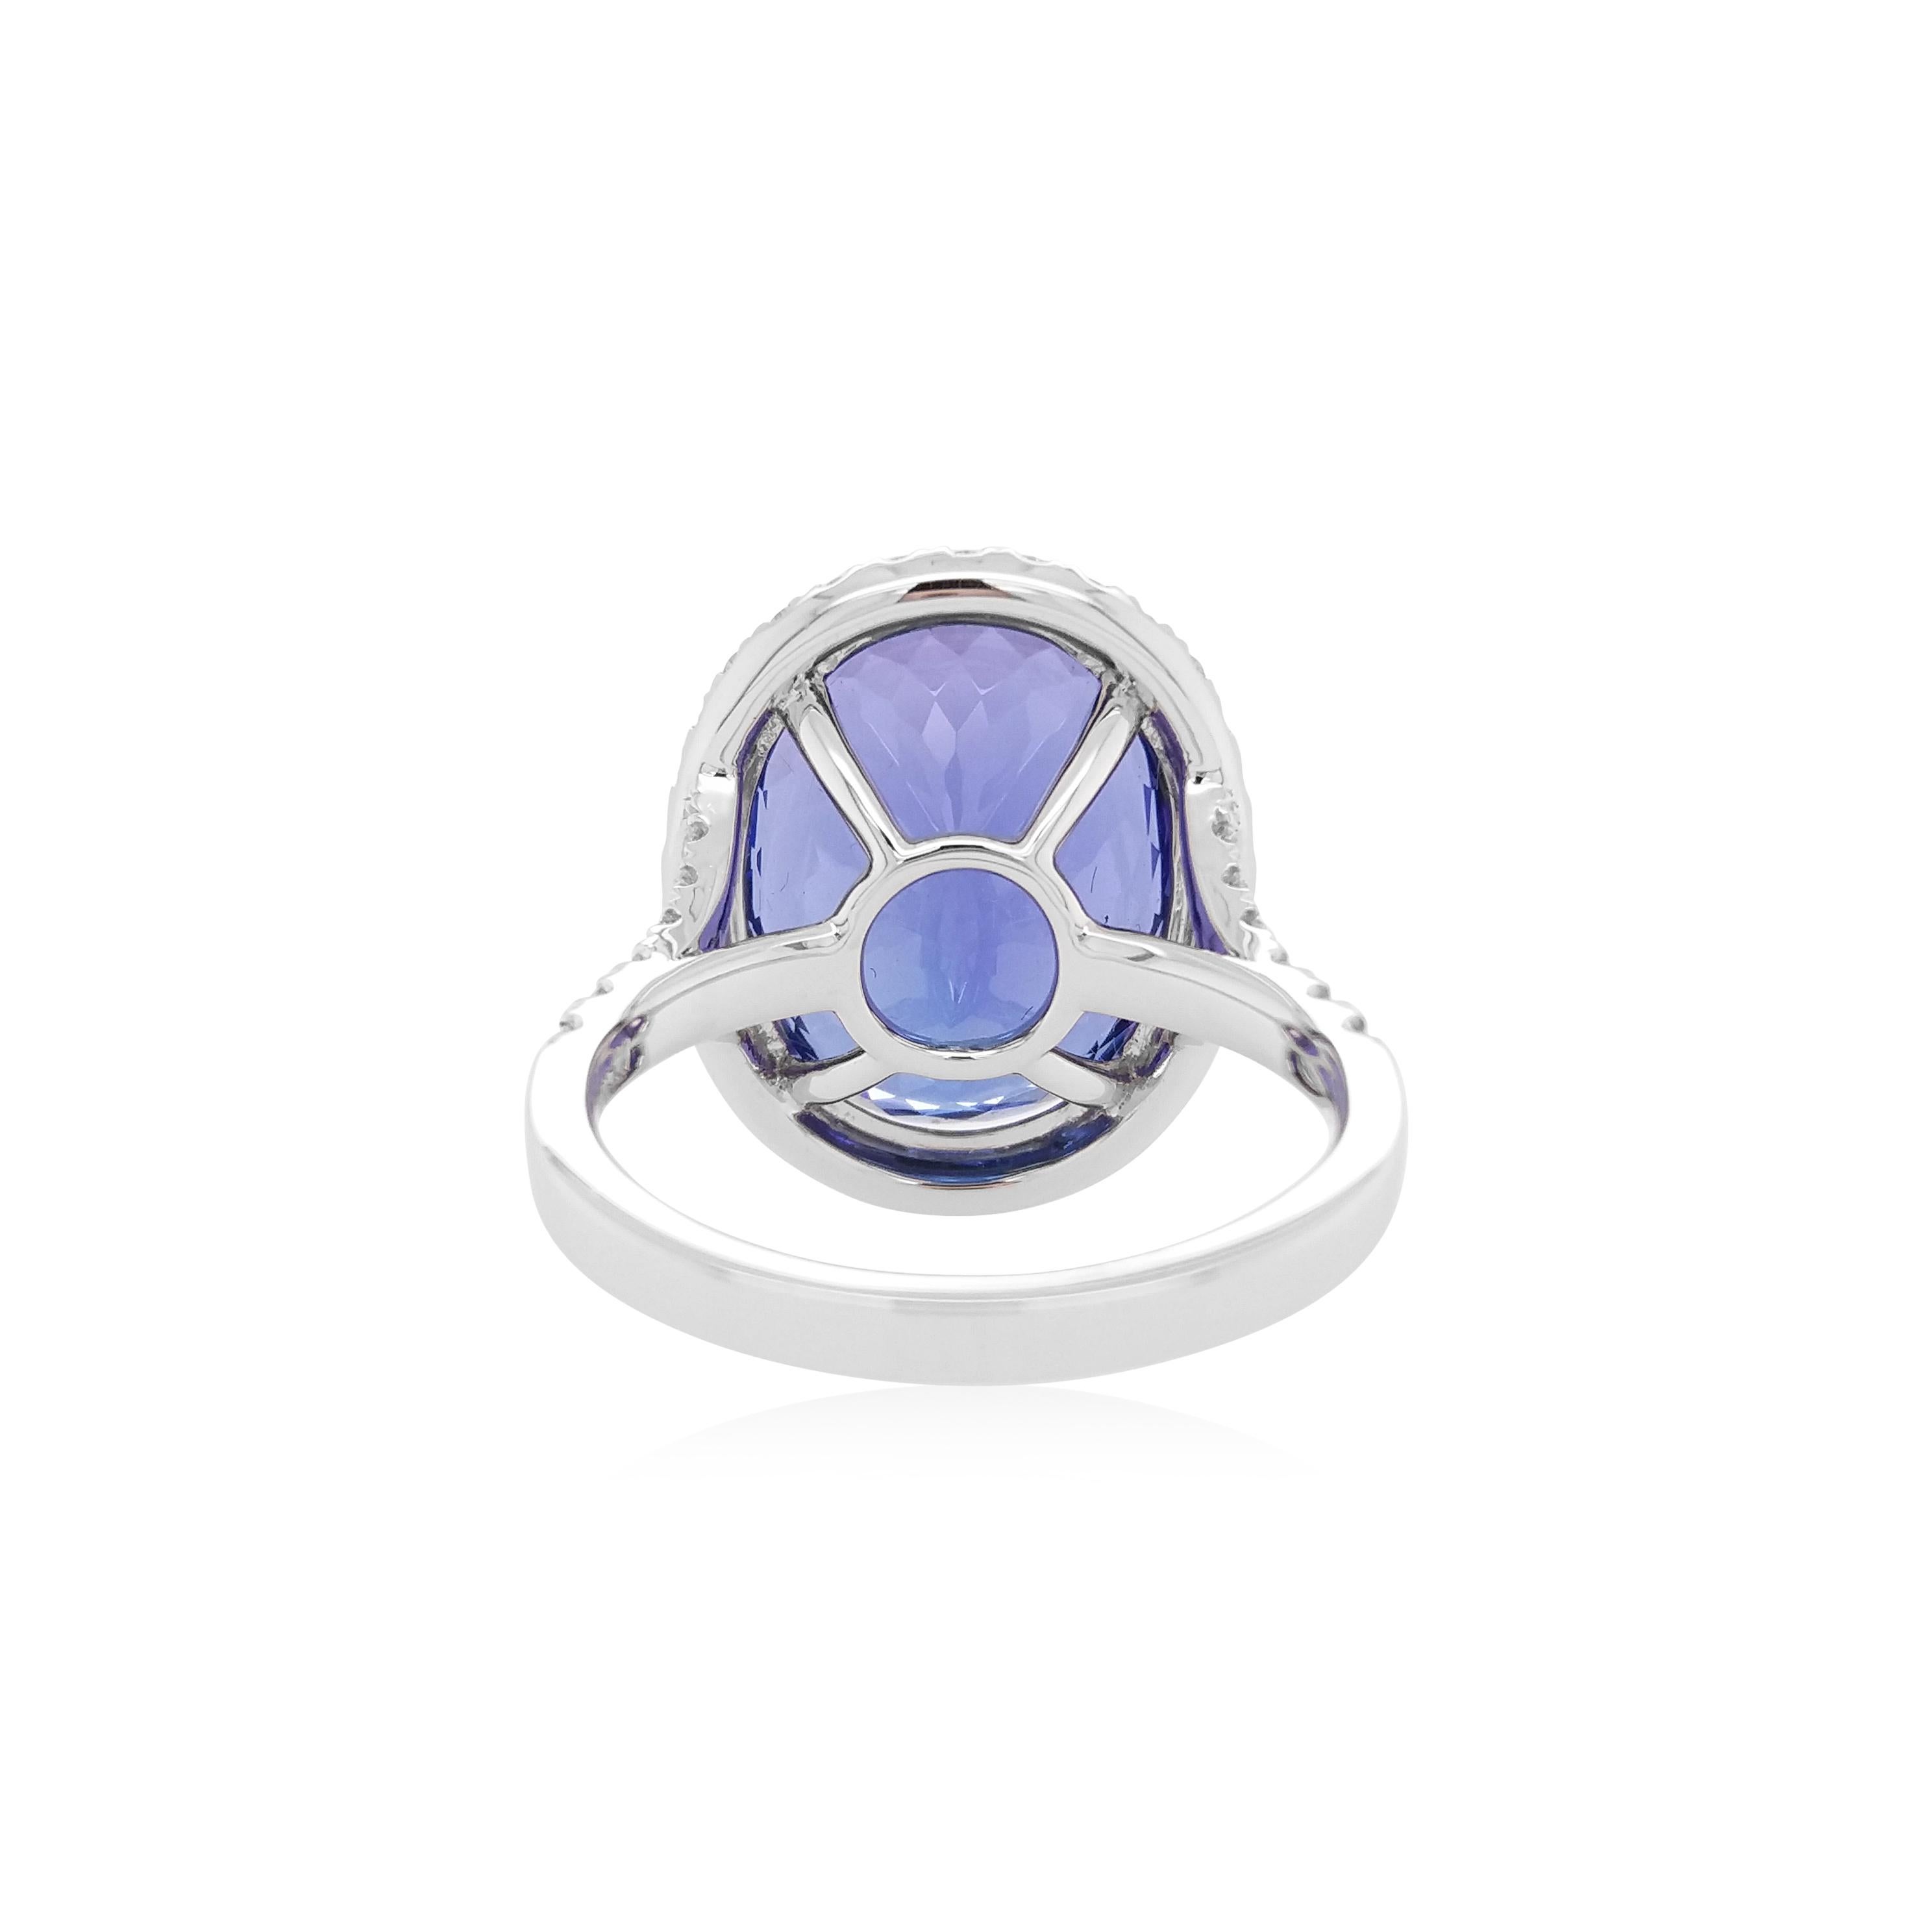 This mesmeric platinum ring features spectacular natural Tanzanite at its forefront, accentuated by a halo of glistening white diamonds which surrounds it. Bold, yet intricate, this one-of-a-kind ring will add a sumptuous touch of colour to your